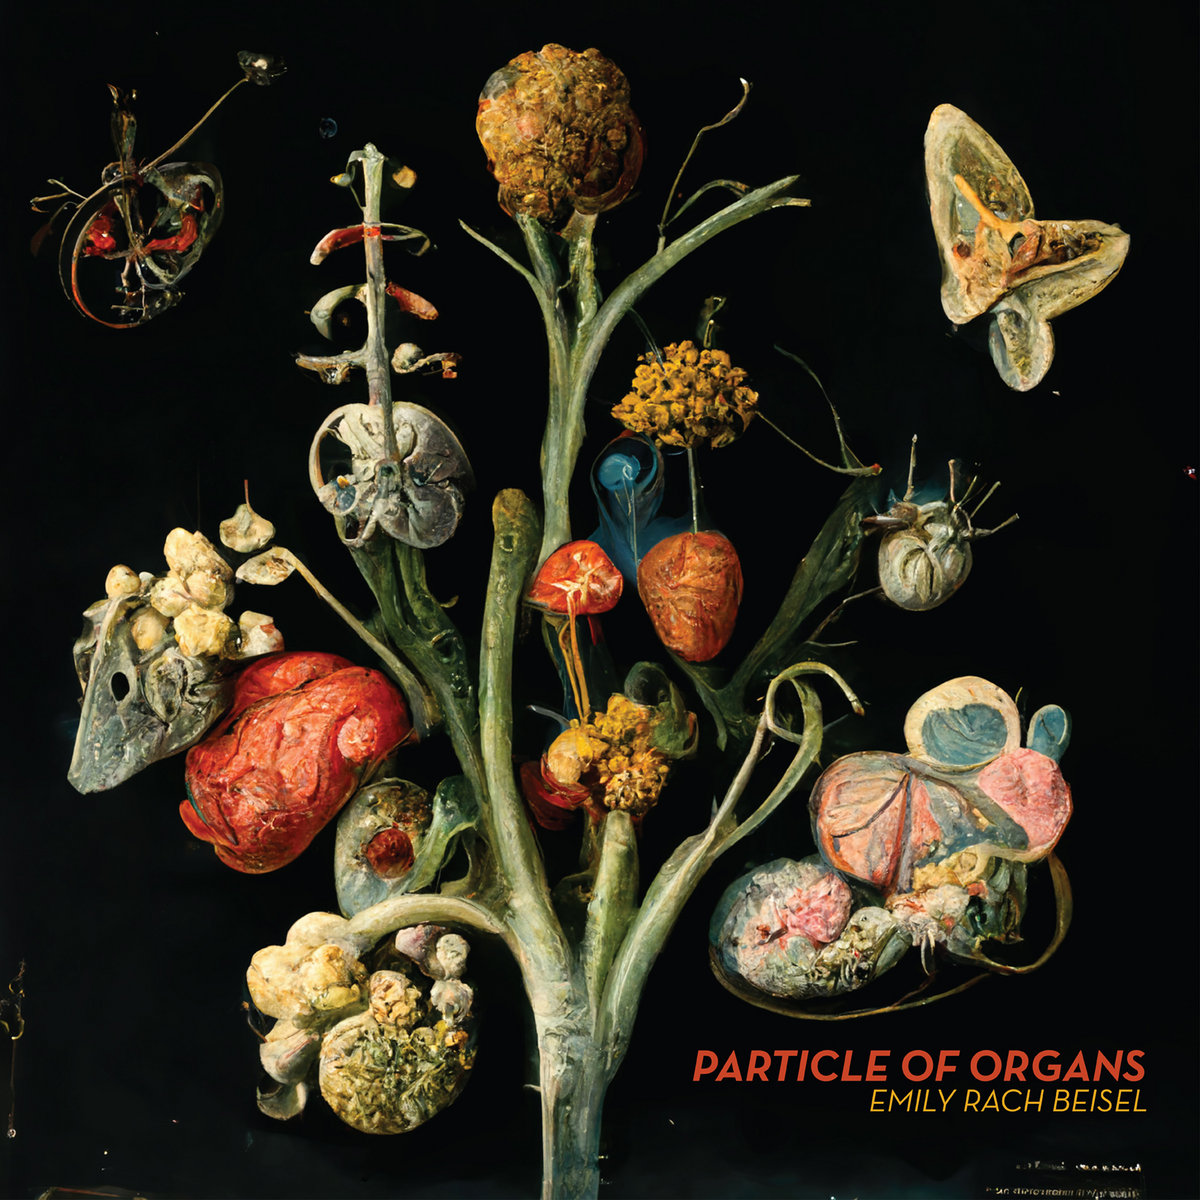 Emily Rach Beisel – Particle of Organs